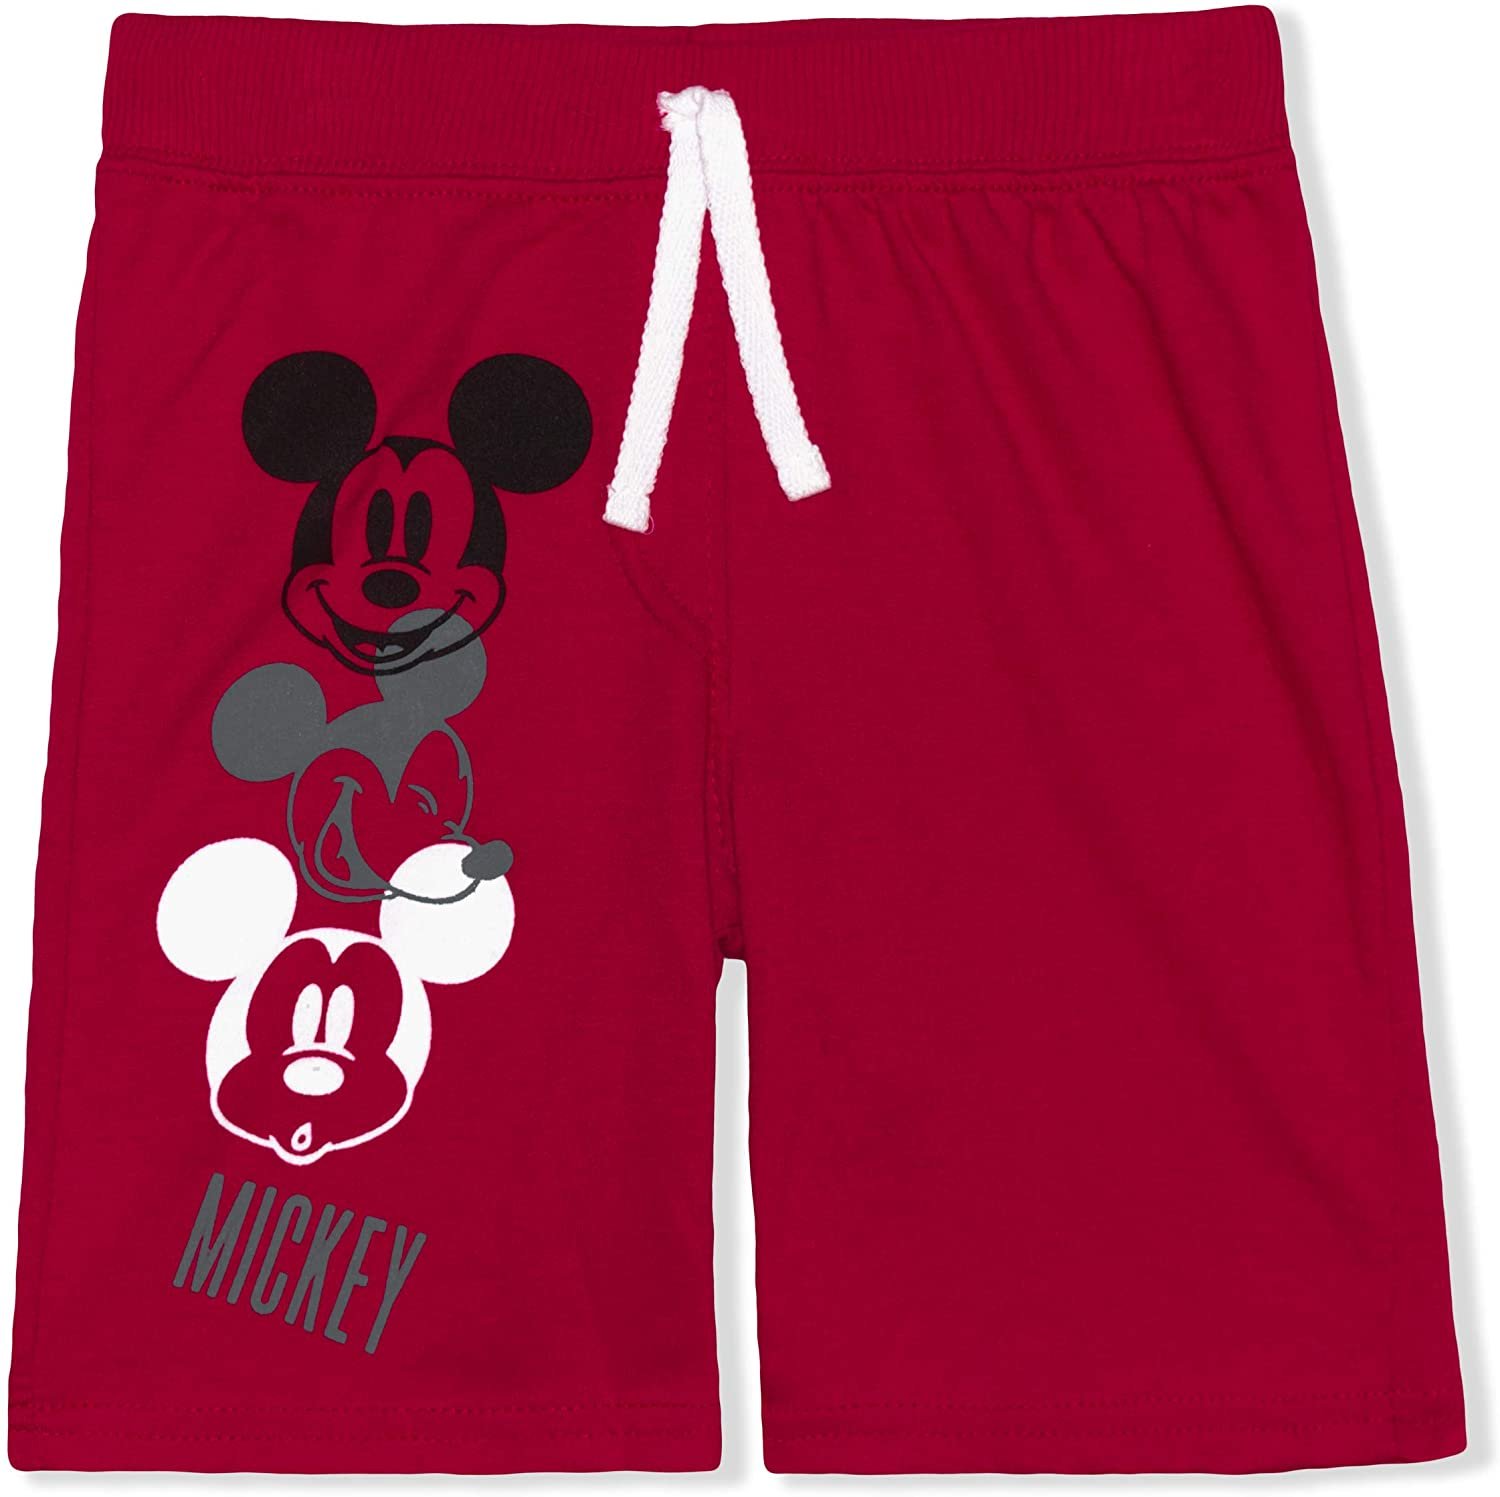 Disney Mickey Mouse 2 Pack Shorts Set for Boys, Toddler Kids Short Pants - image 3 of 5